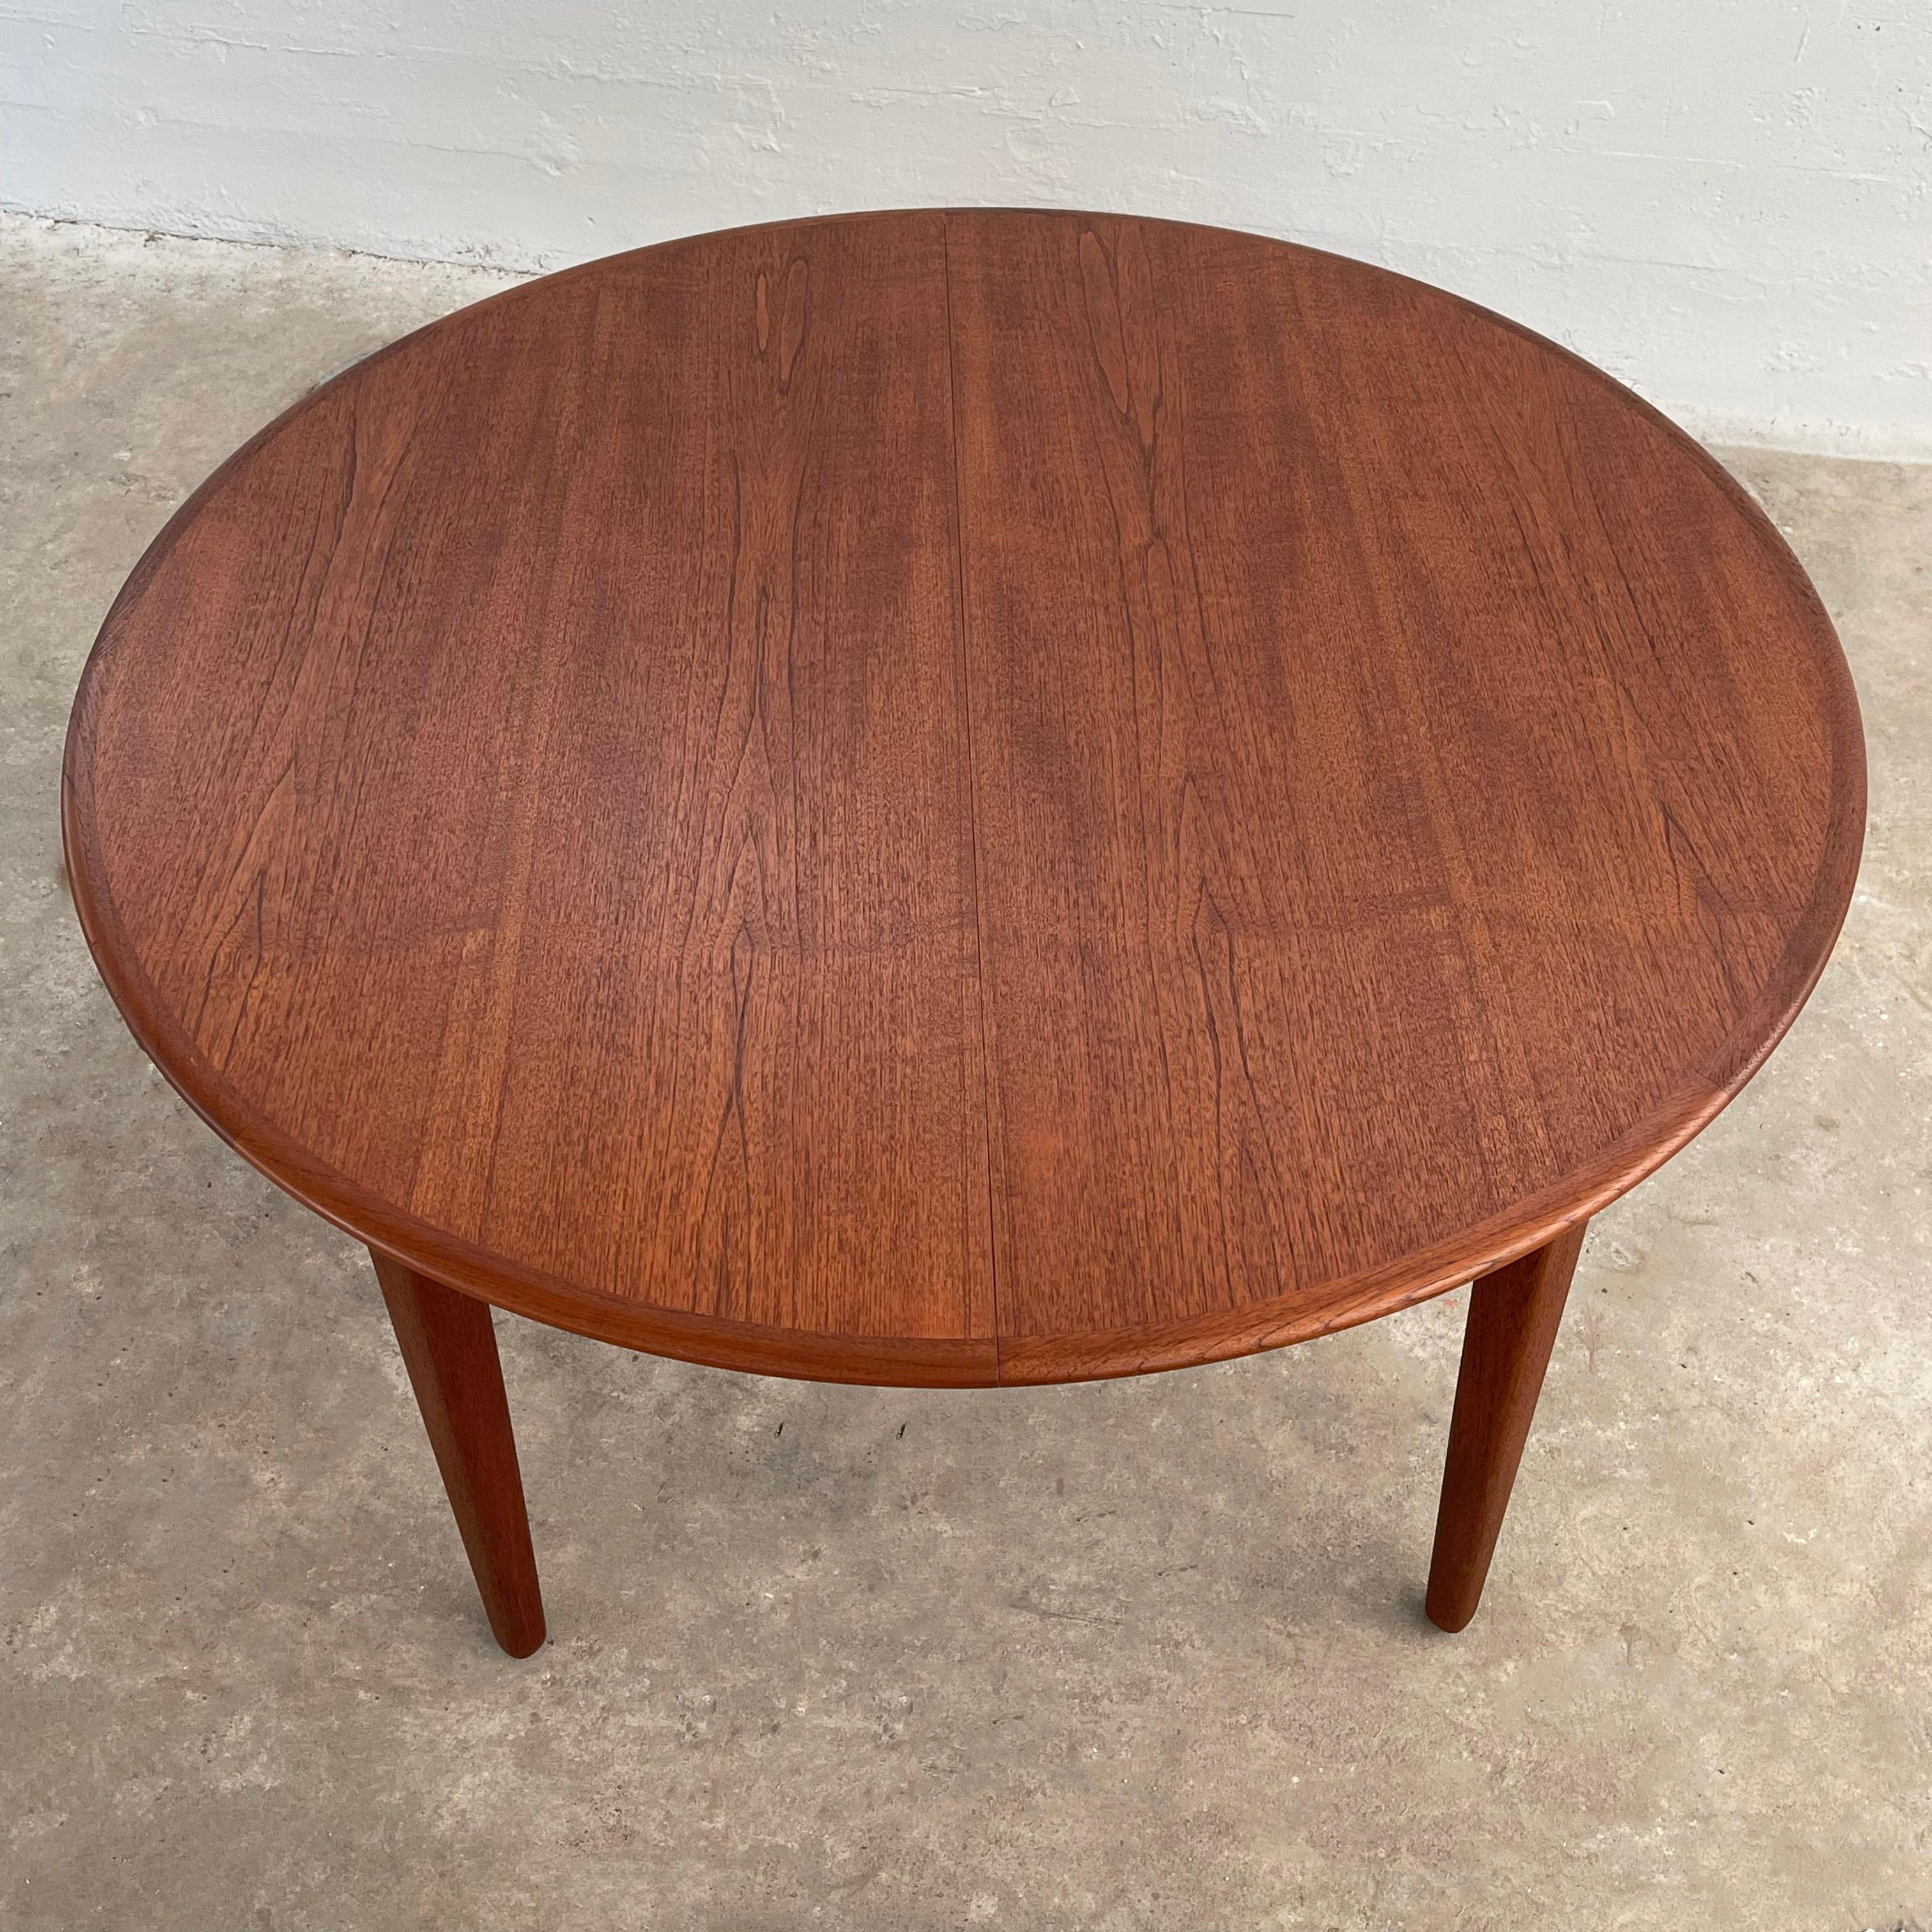 Round Teak Extension Dining Table By Henning Kjaernulf For Soro Stole, Denmark For Sale 1